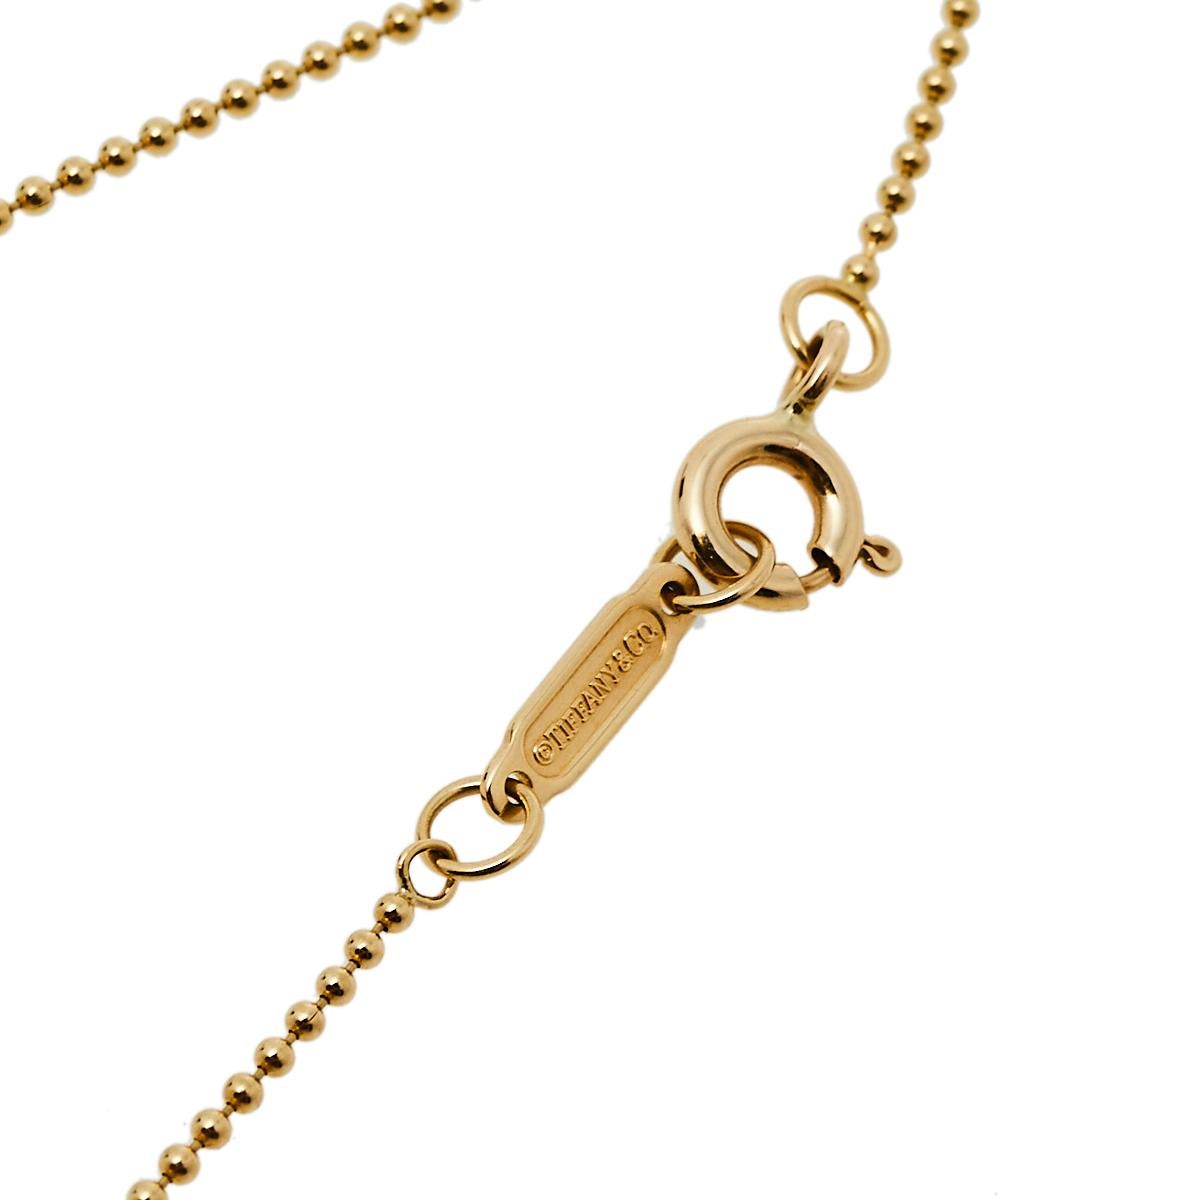 Symbolizing a bright future, the Tiffany keys from Tiffany & Co. are much loved and instantly recognizable. This necklace, featuring the Tiffany key pendant, comes crafted from 18k yellow gold. The key is detailed with a knot design and the chain is